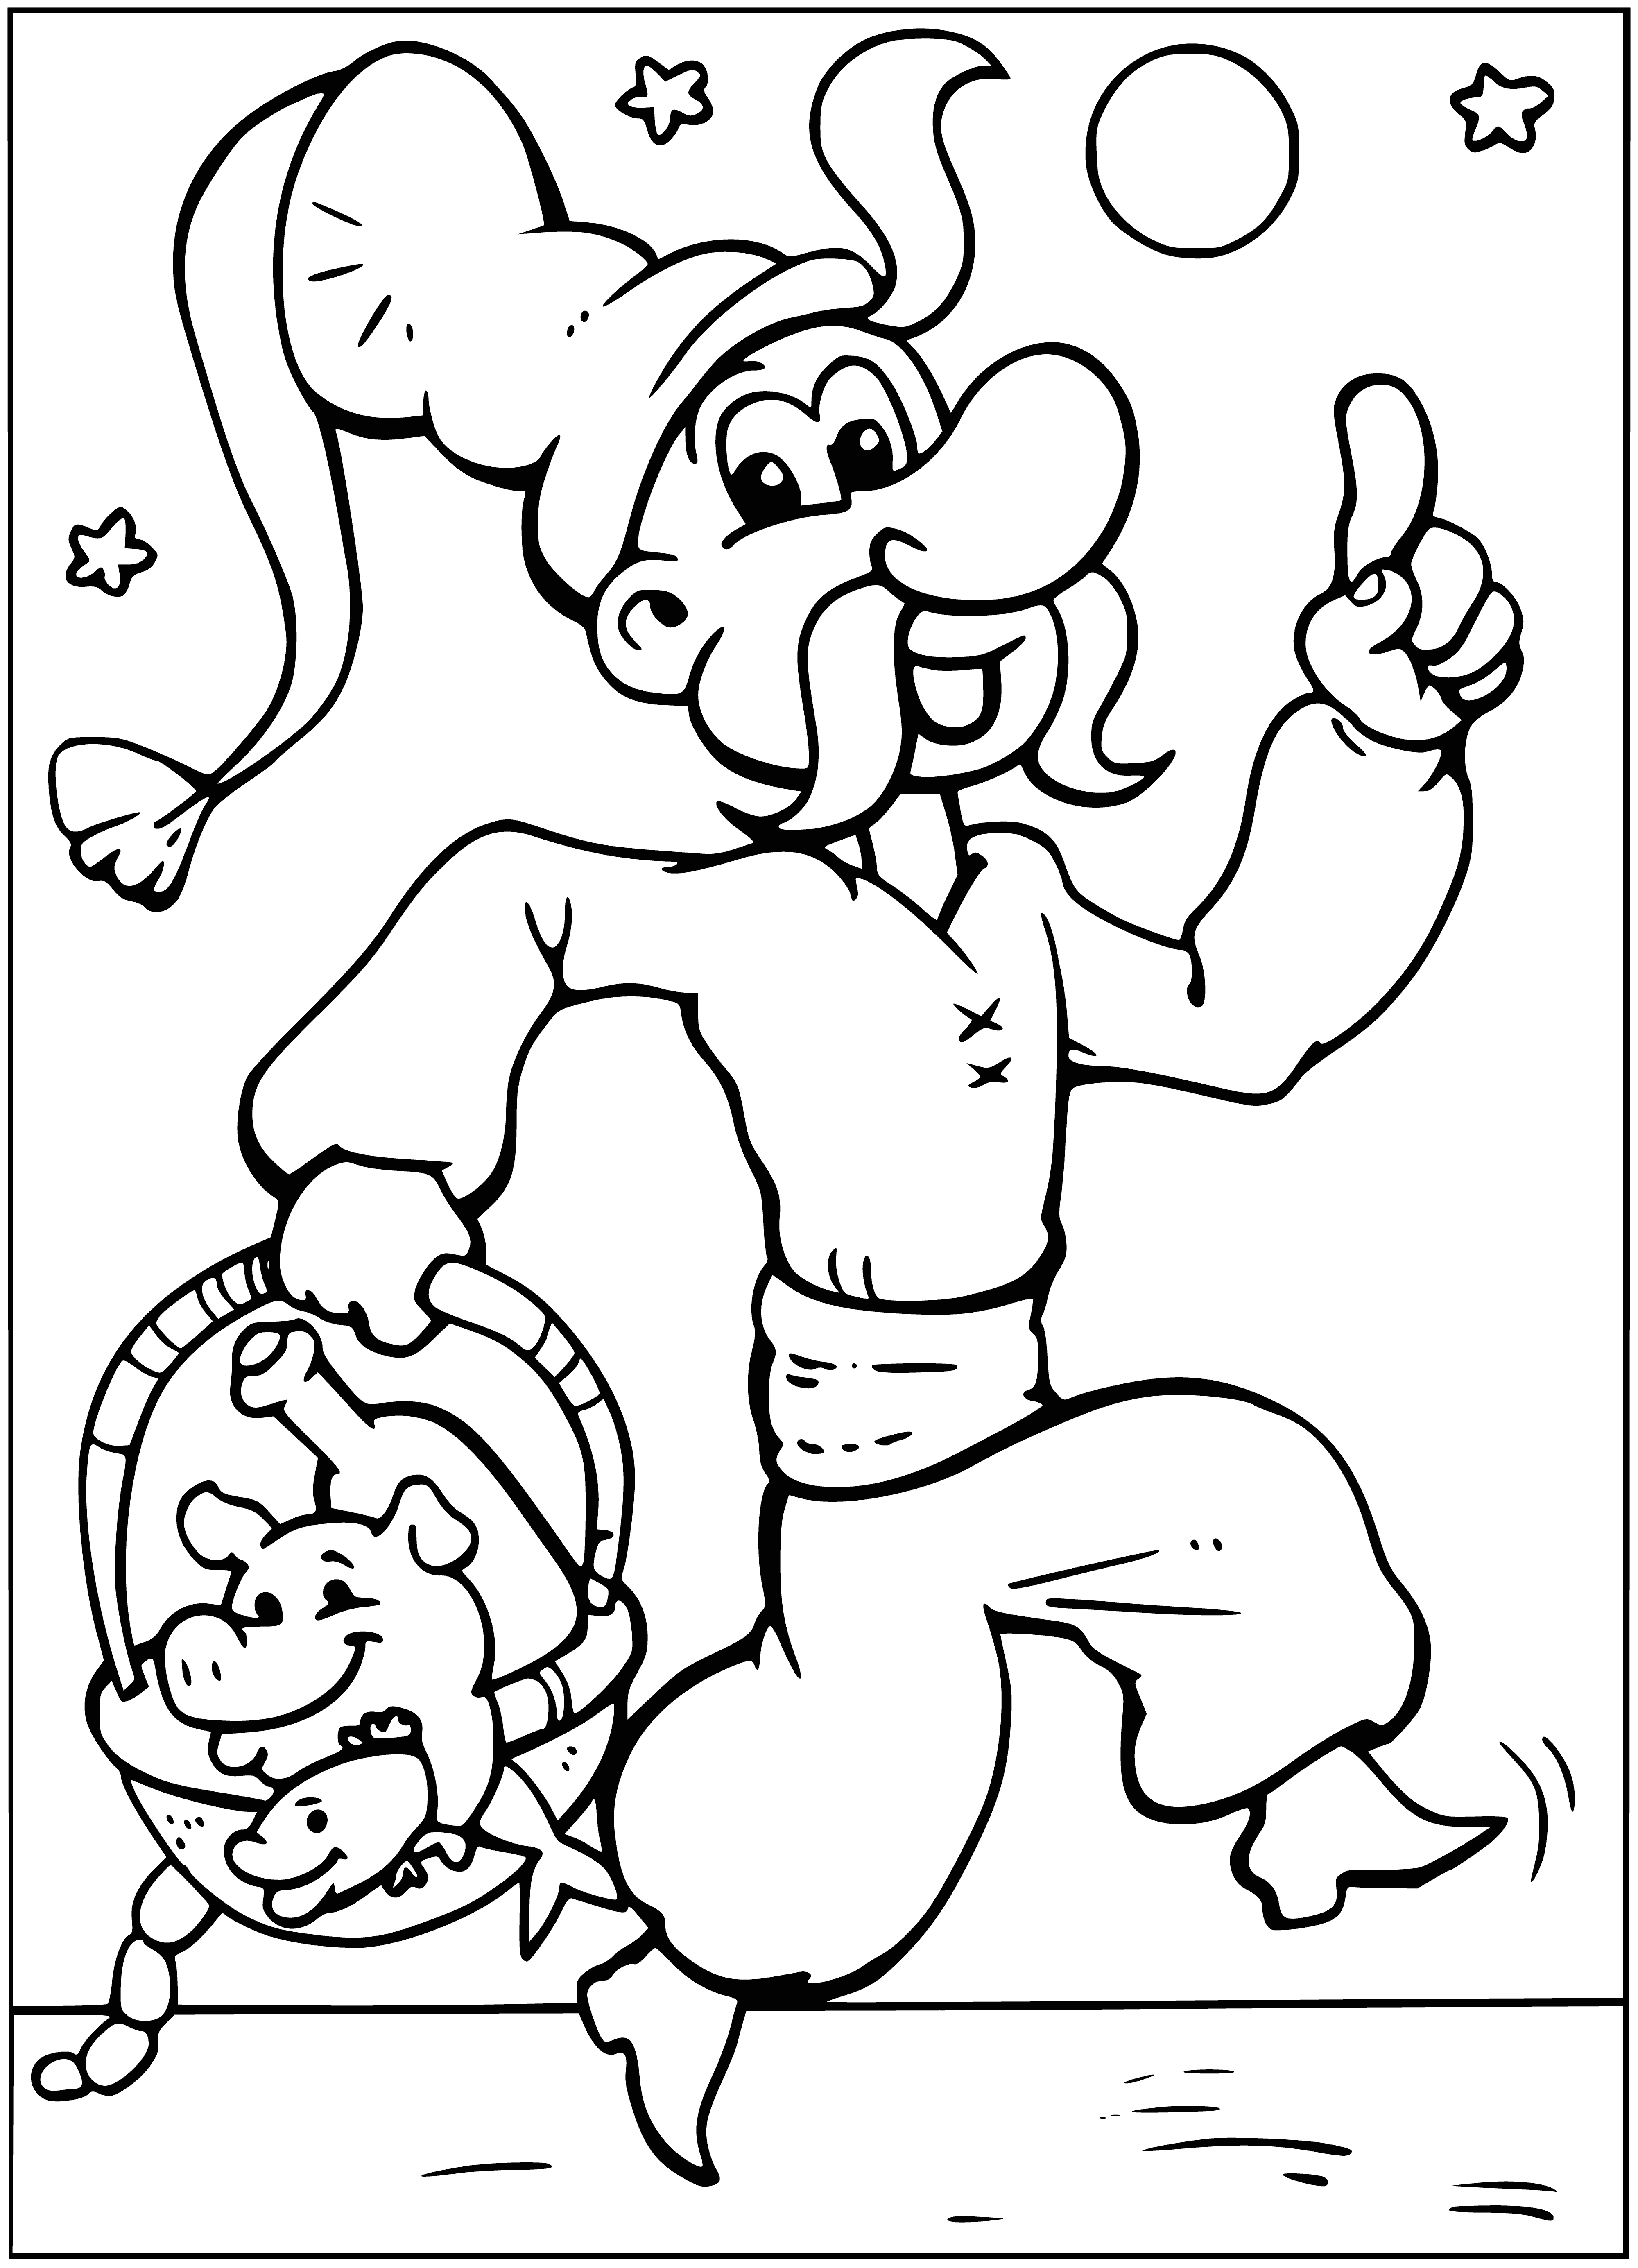 coloring page: Cossacks of southern Russia are renowned for their horsemanship and military prowess.